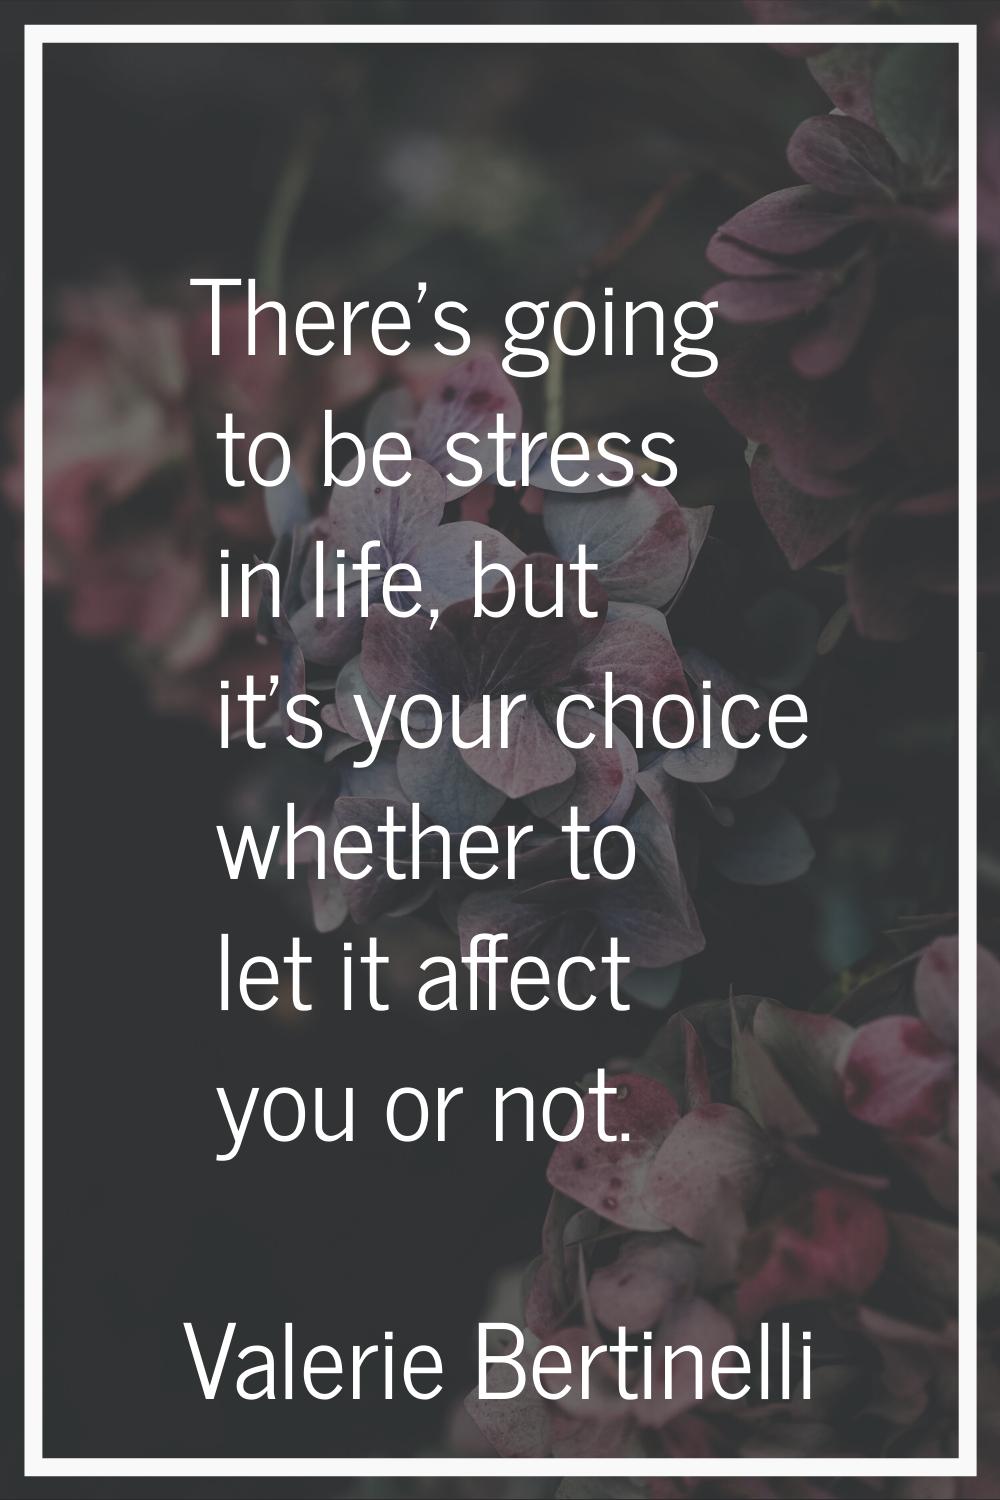 There's going to be stress in life, but it's your choice whether to let it affect you or not.